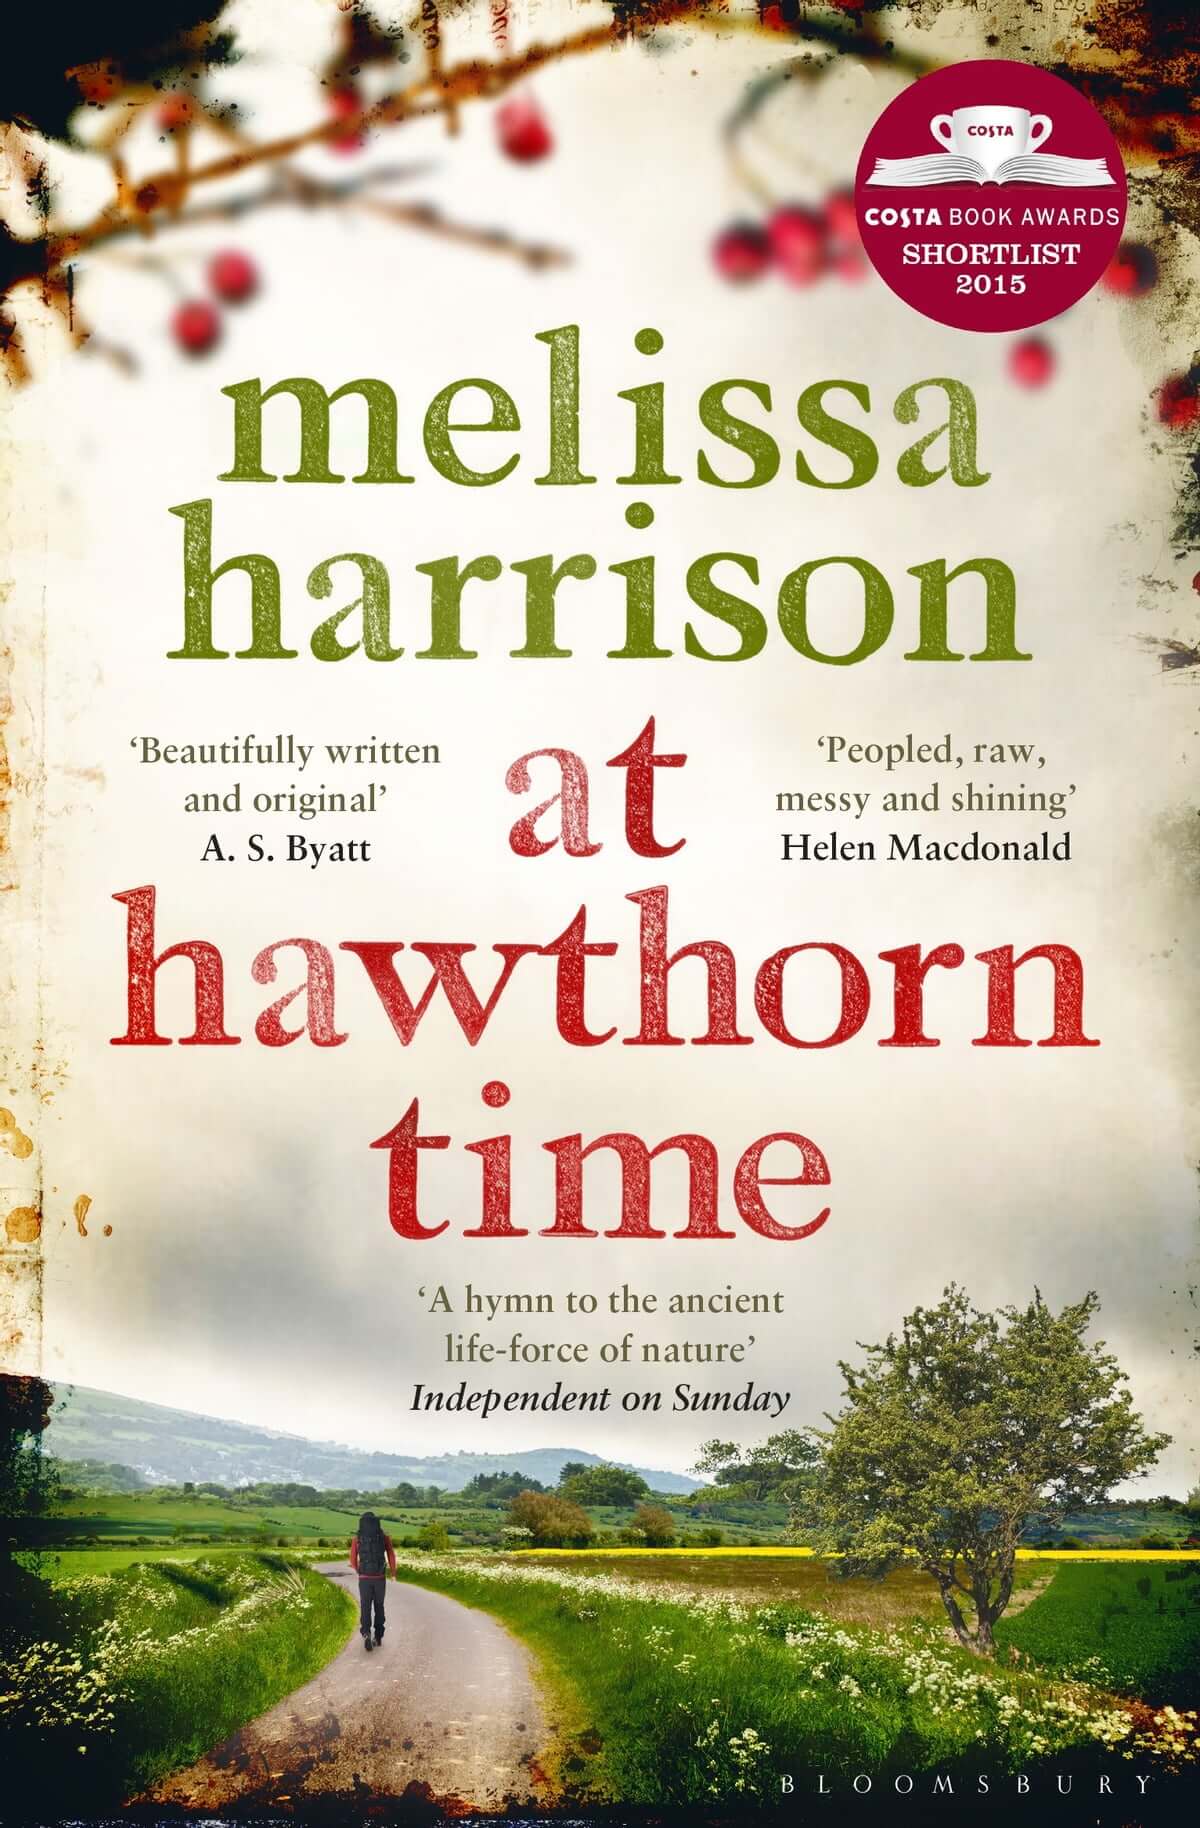 At Hawthorn Time by Melissa Harrison